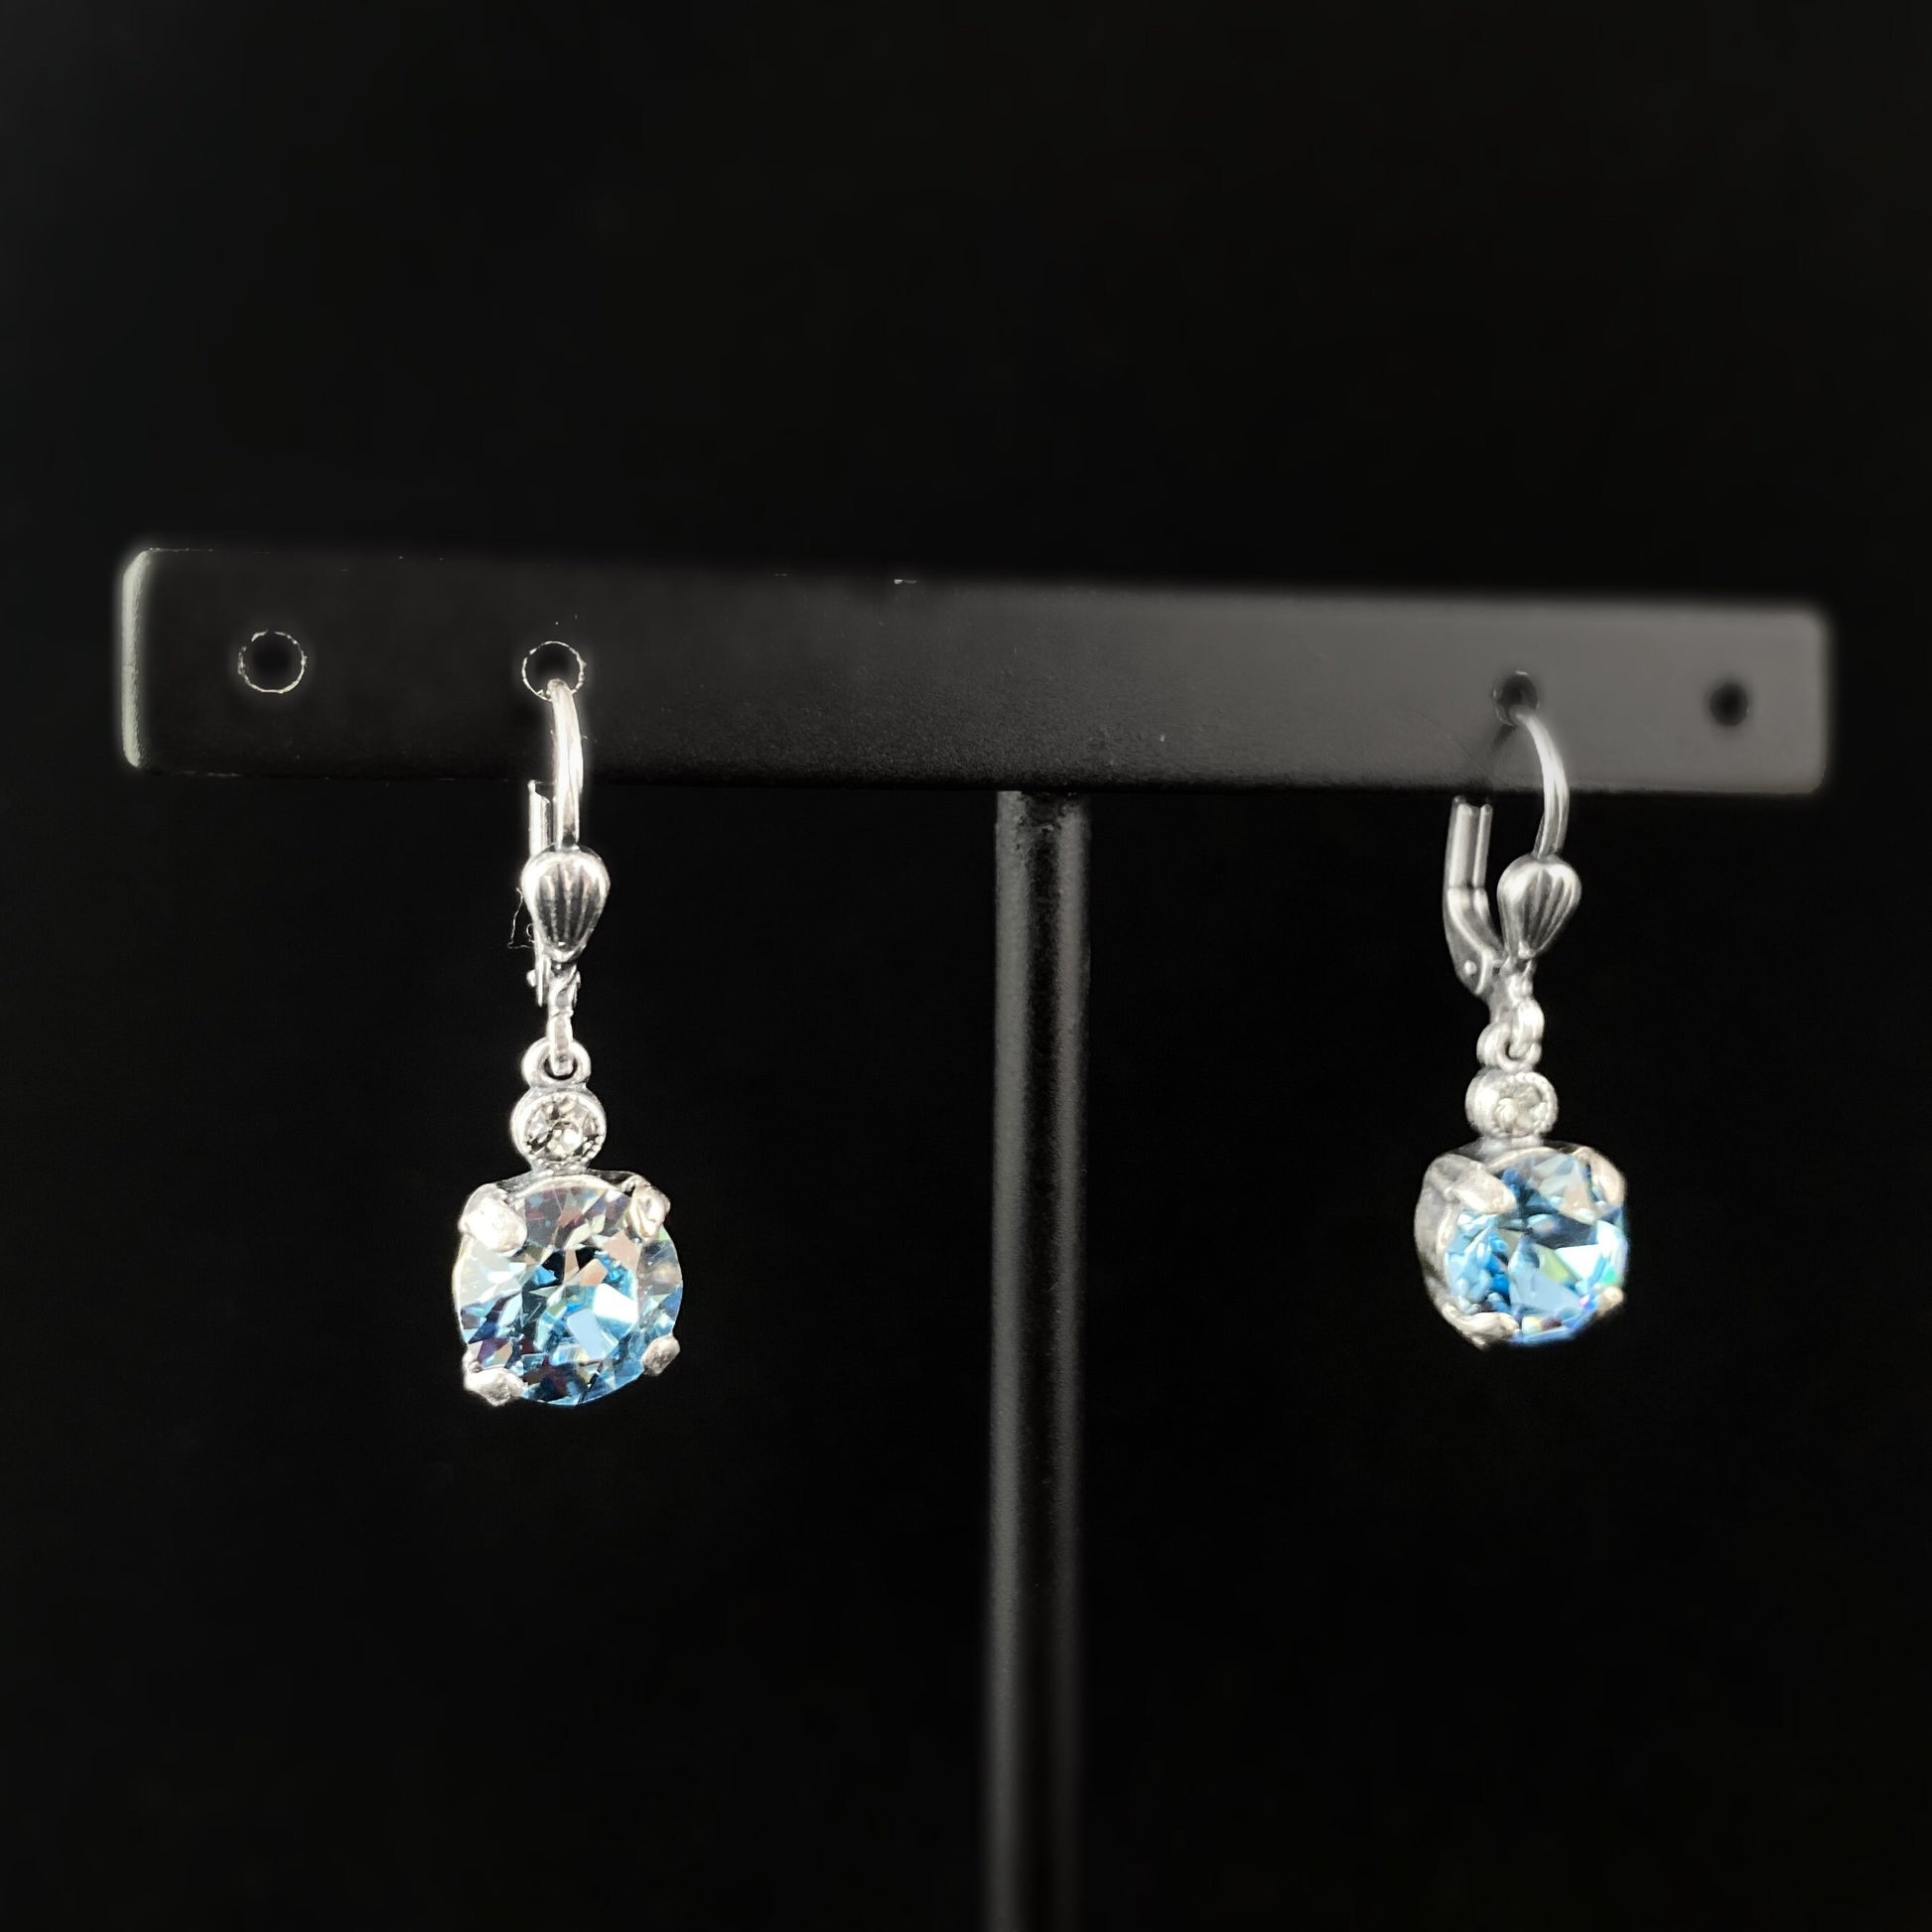 Blue Circle Swarovski Crystal Drop Earrings with Tiny Crystal Detailing- La Vie Parisienne by Catherine Popesco